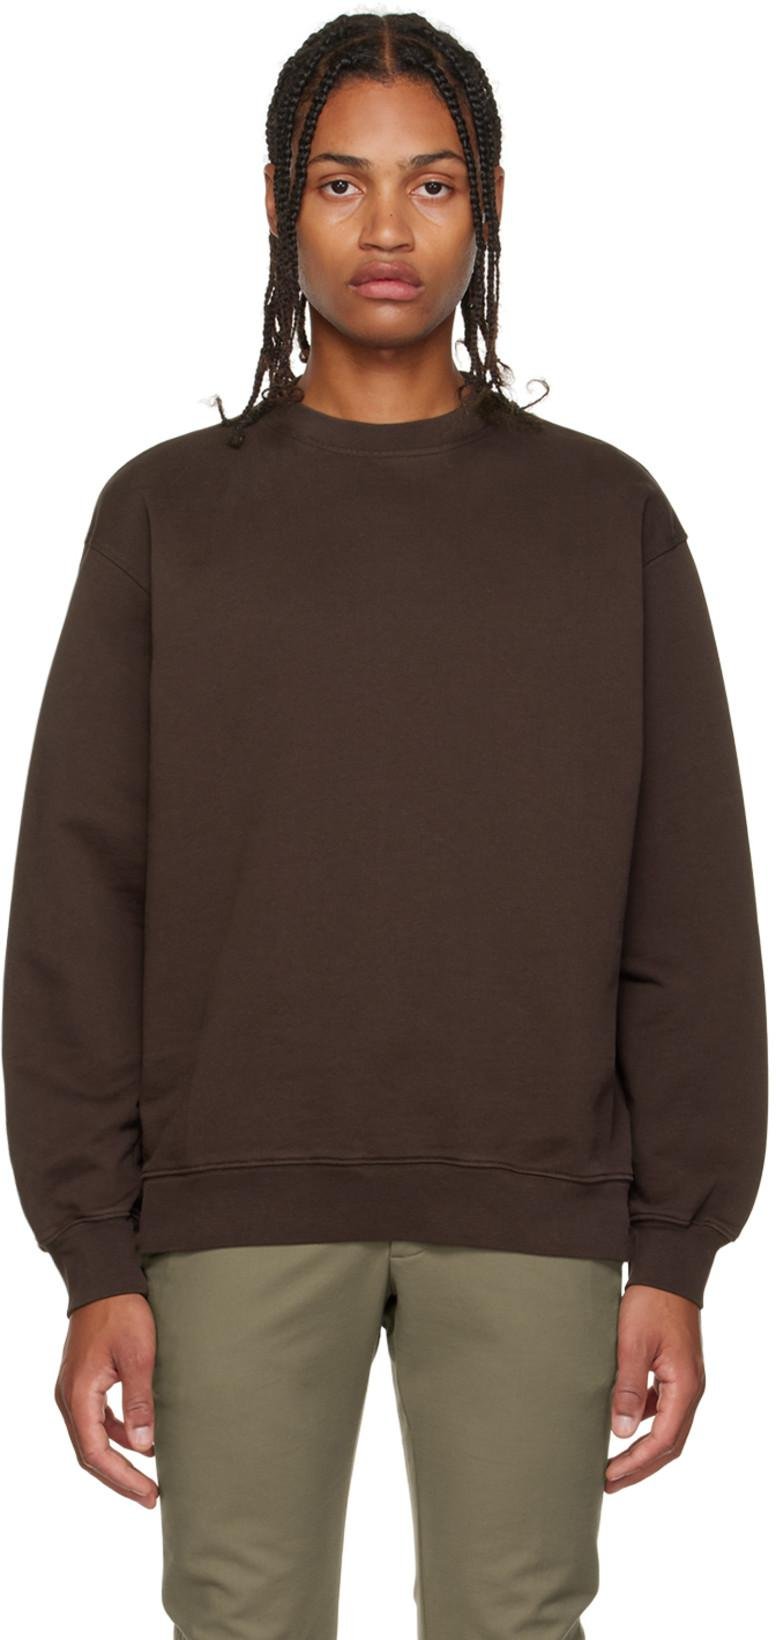 Brown Rib Sweatshirt by ANOTHER ASPECT